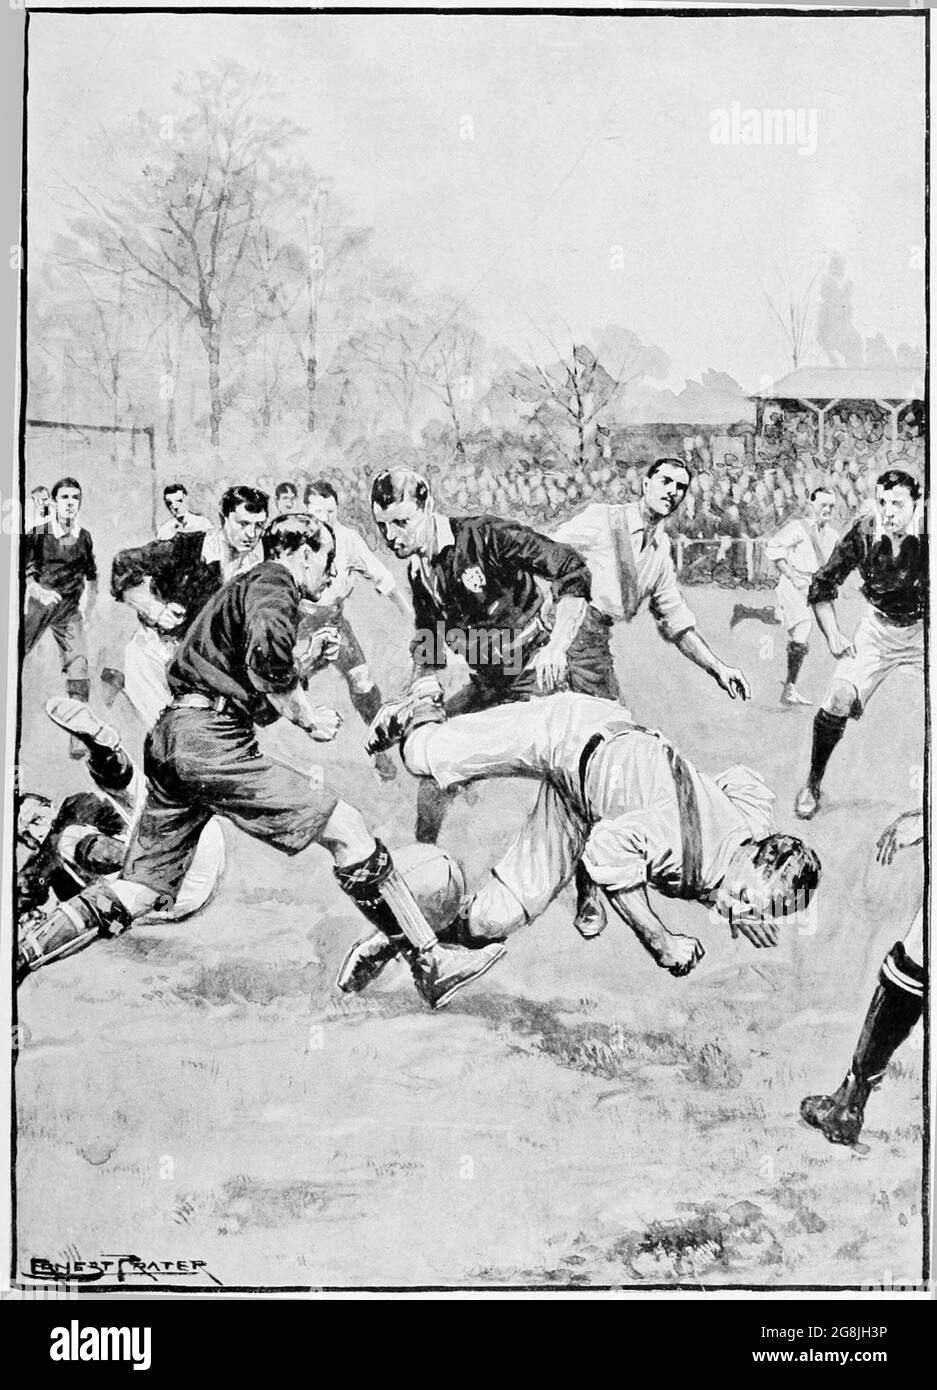 Ernest Prater - A Fall - Rough and Tumble of an early football match - 1905 Stock Photo